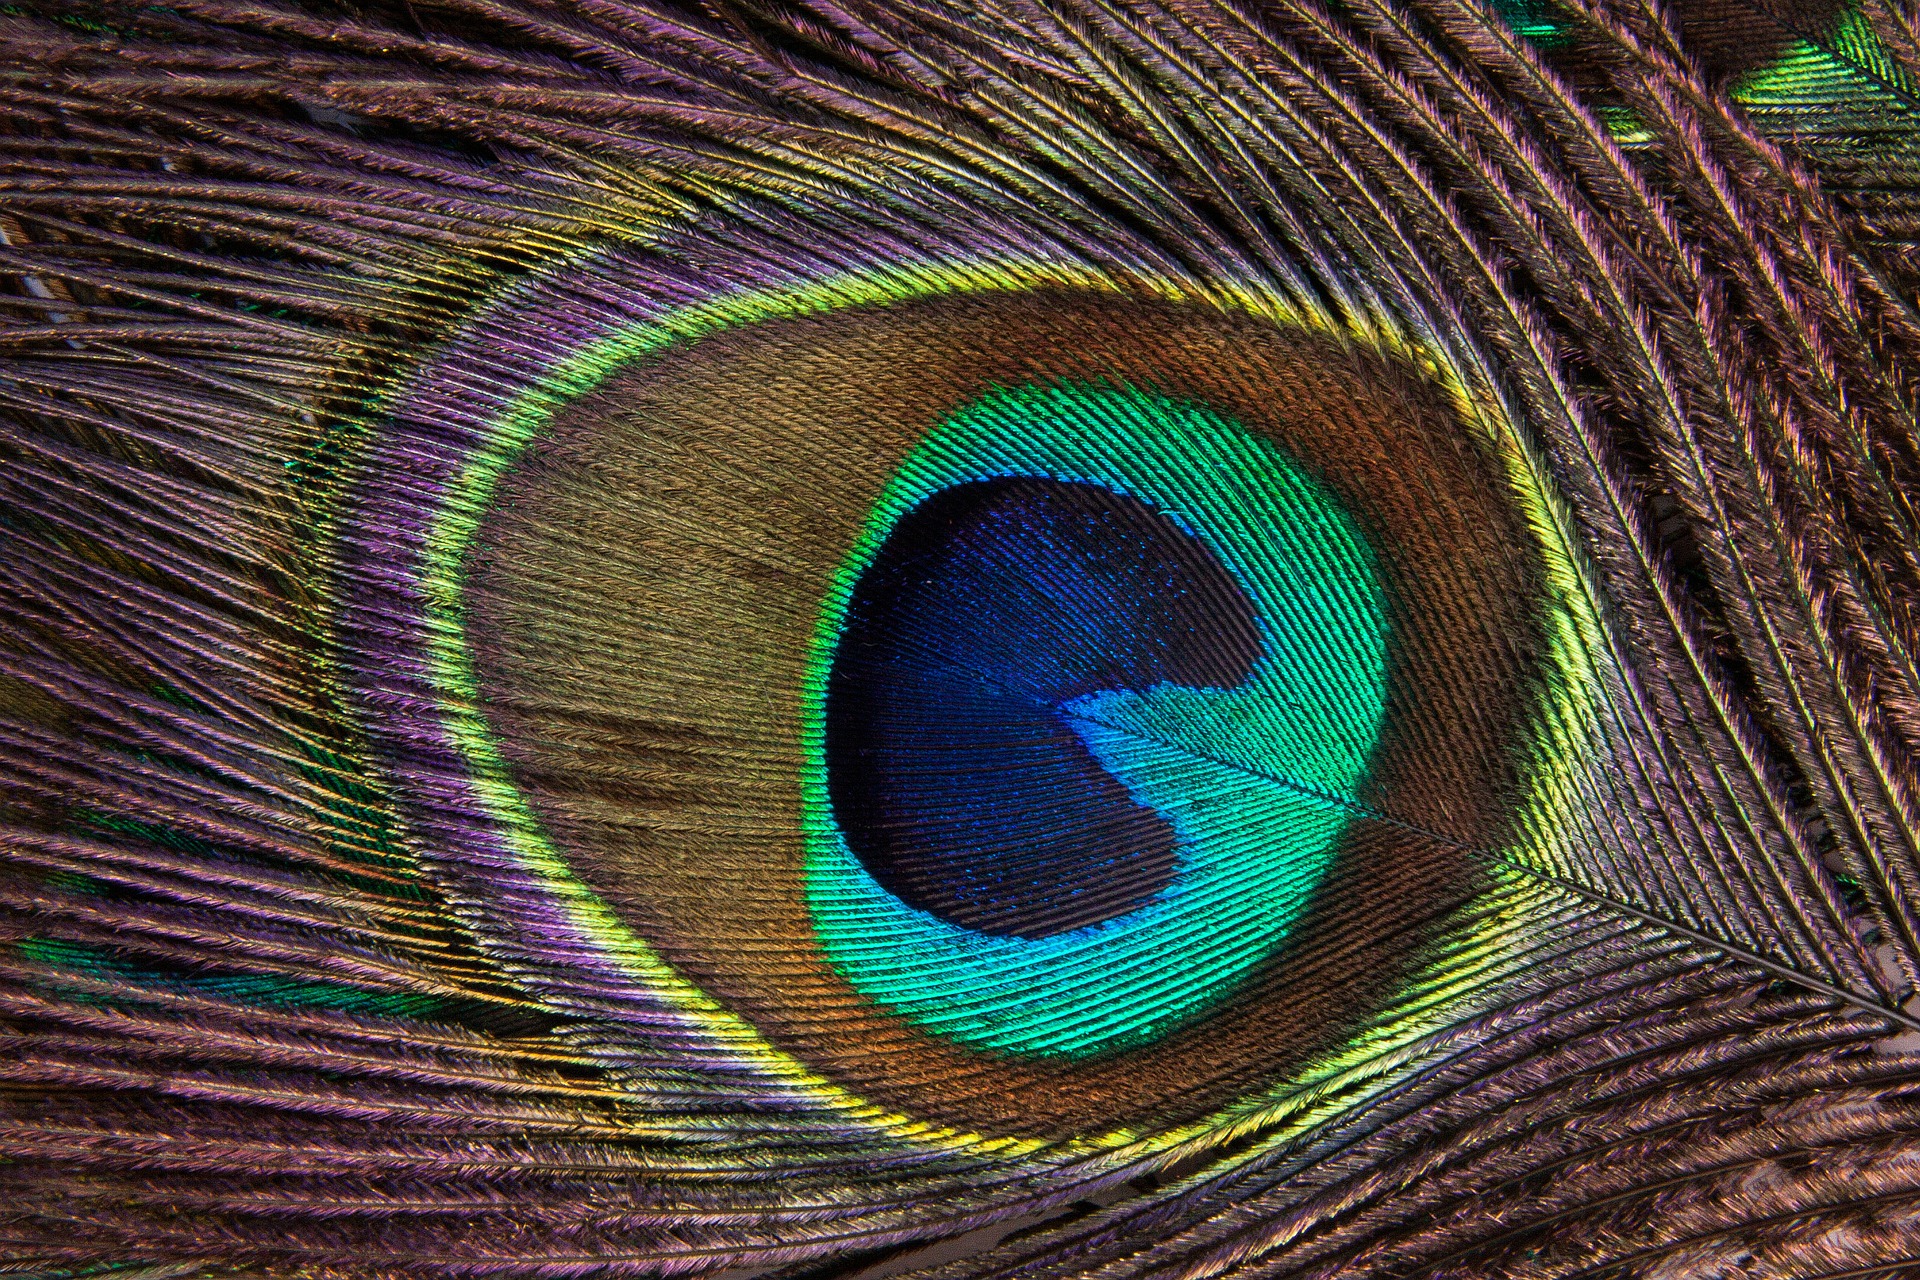 Peacock Feather 186339 - Peacock Feather , HD Wallpaper & Backgrounds